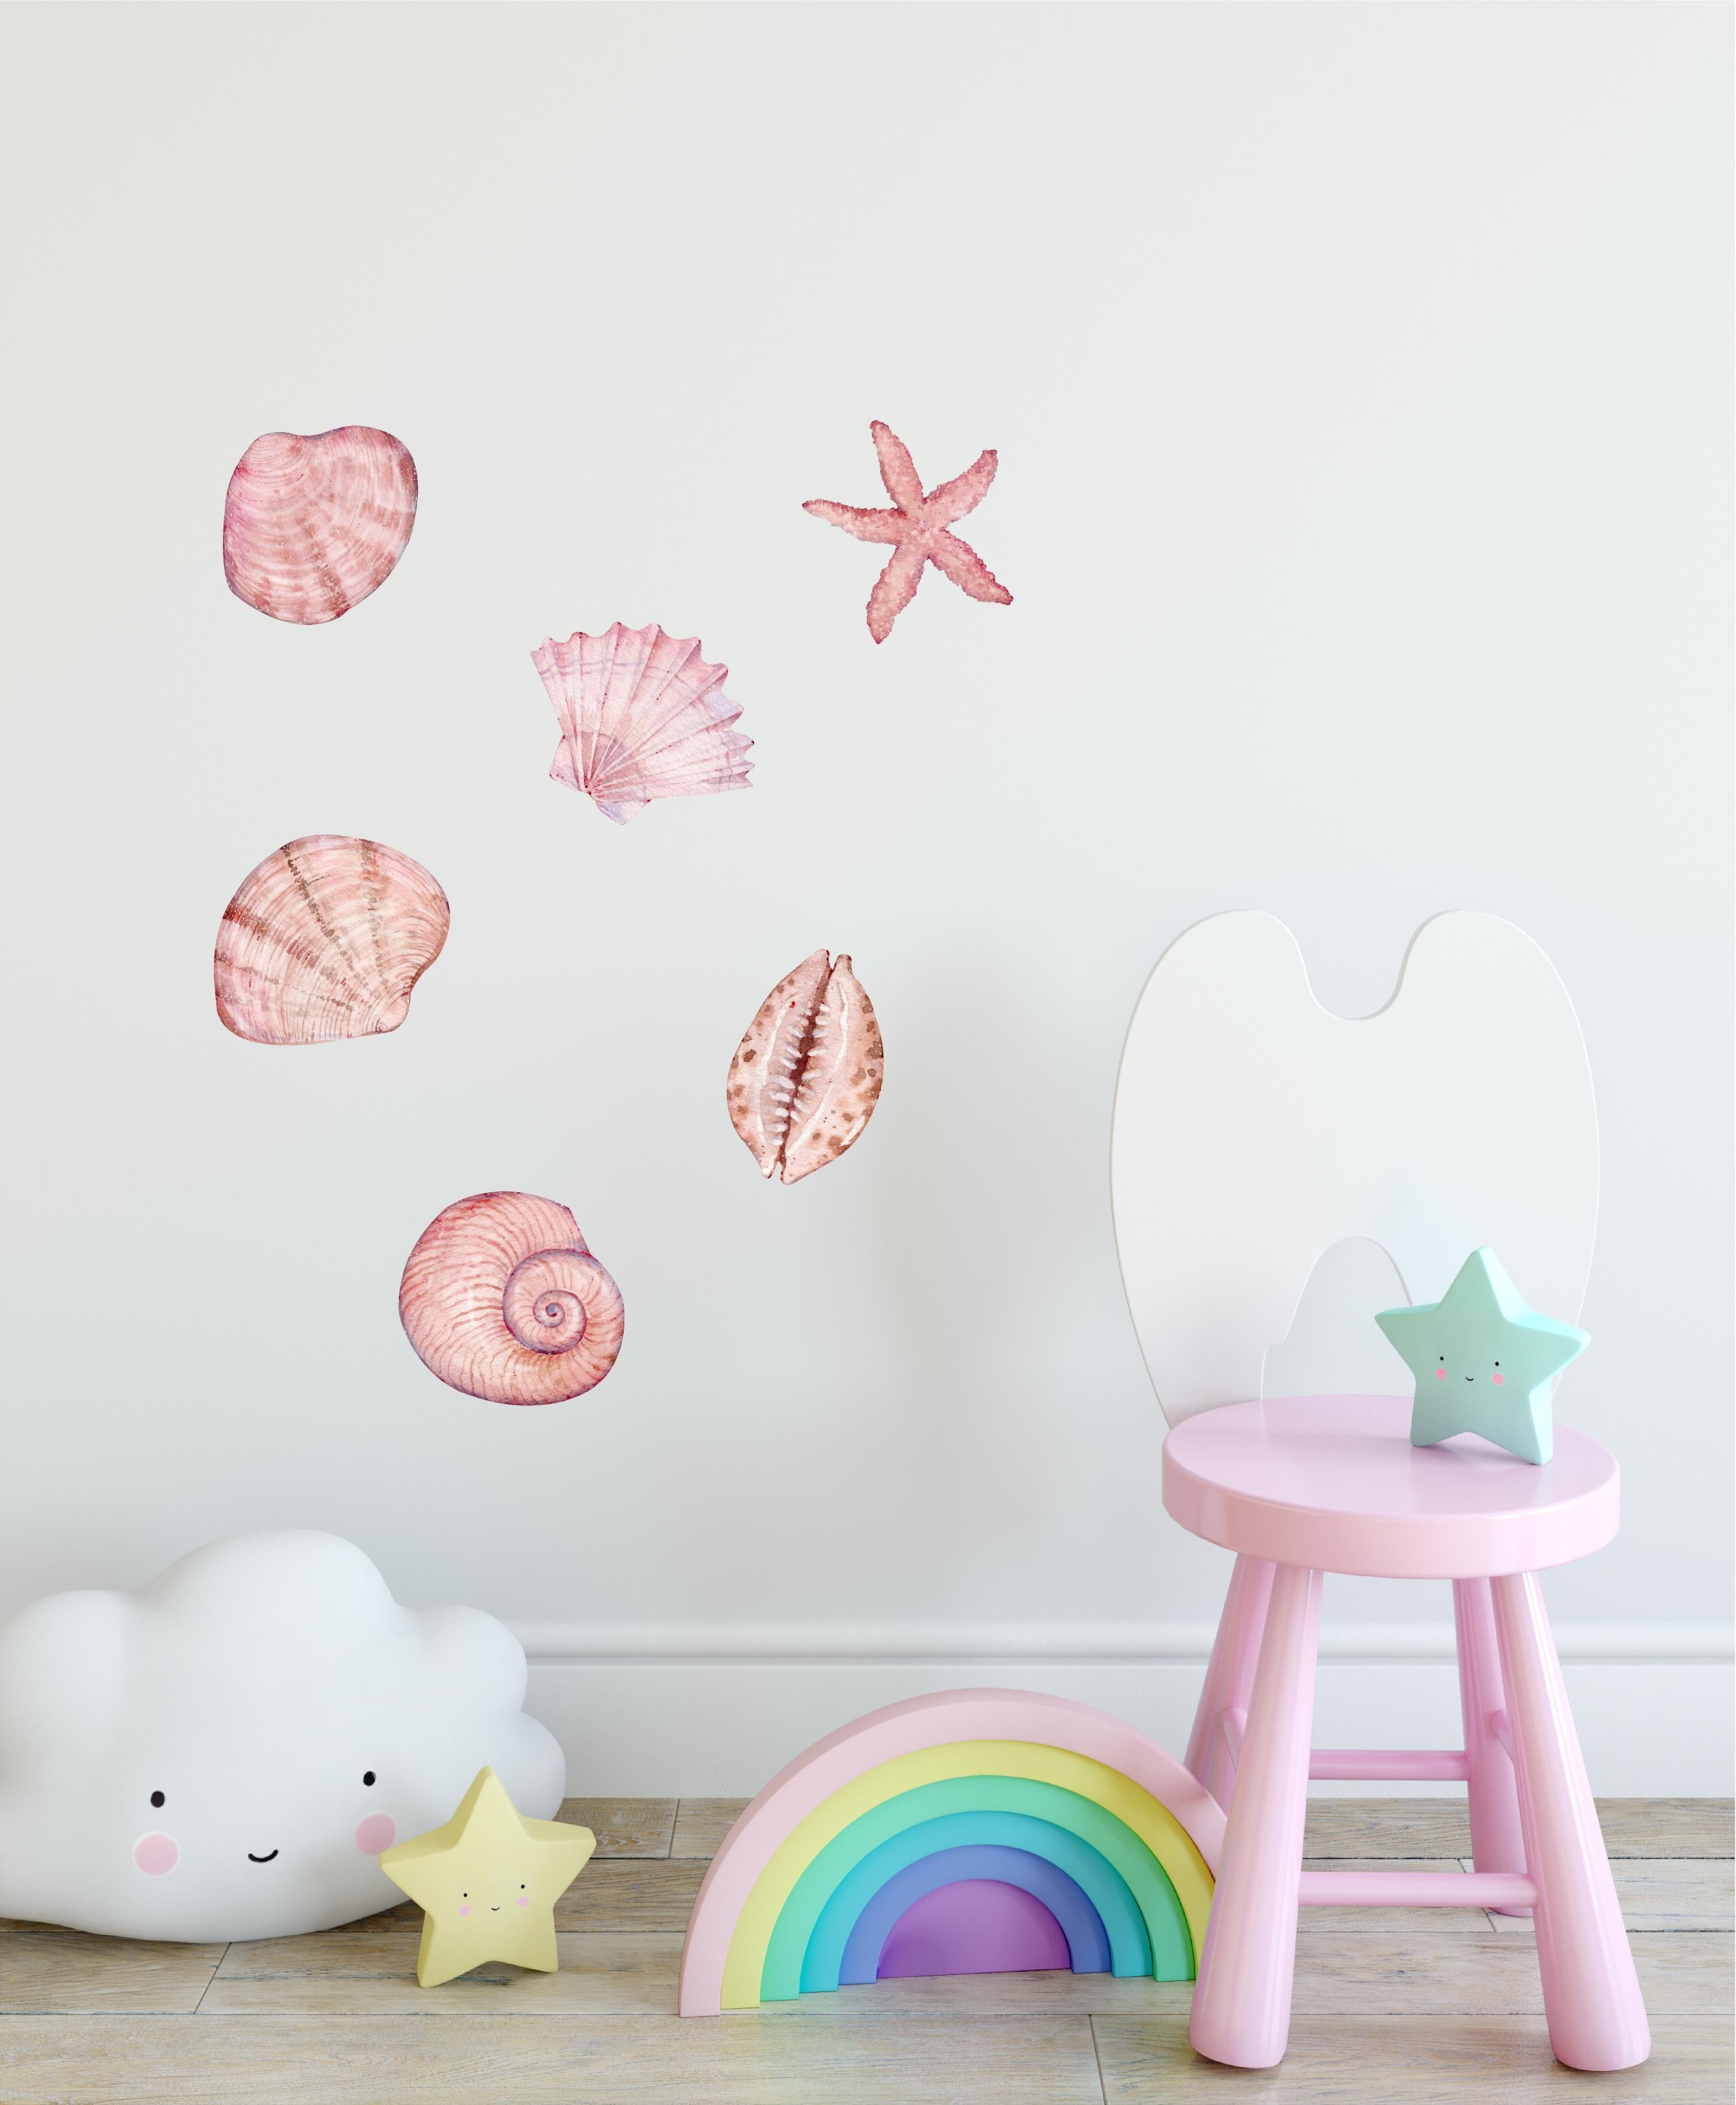 Pink Seashells & Starfish Wall Decal Set of 6 Ocean Sea Life Removable Fabric Wall Sticker | DecalBaby